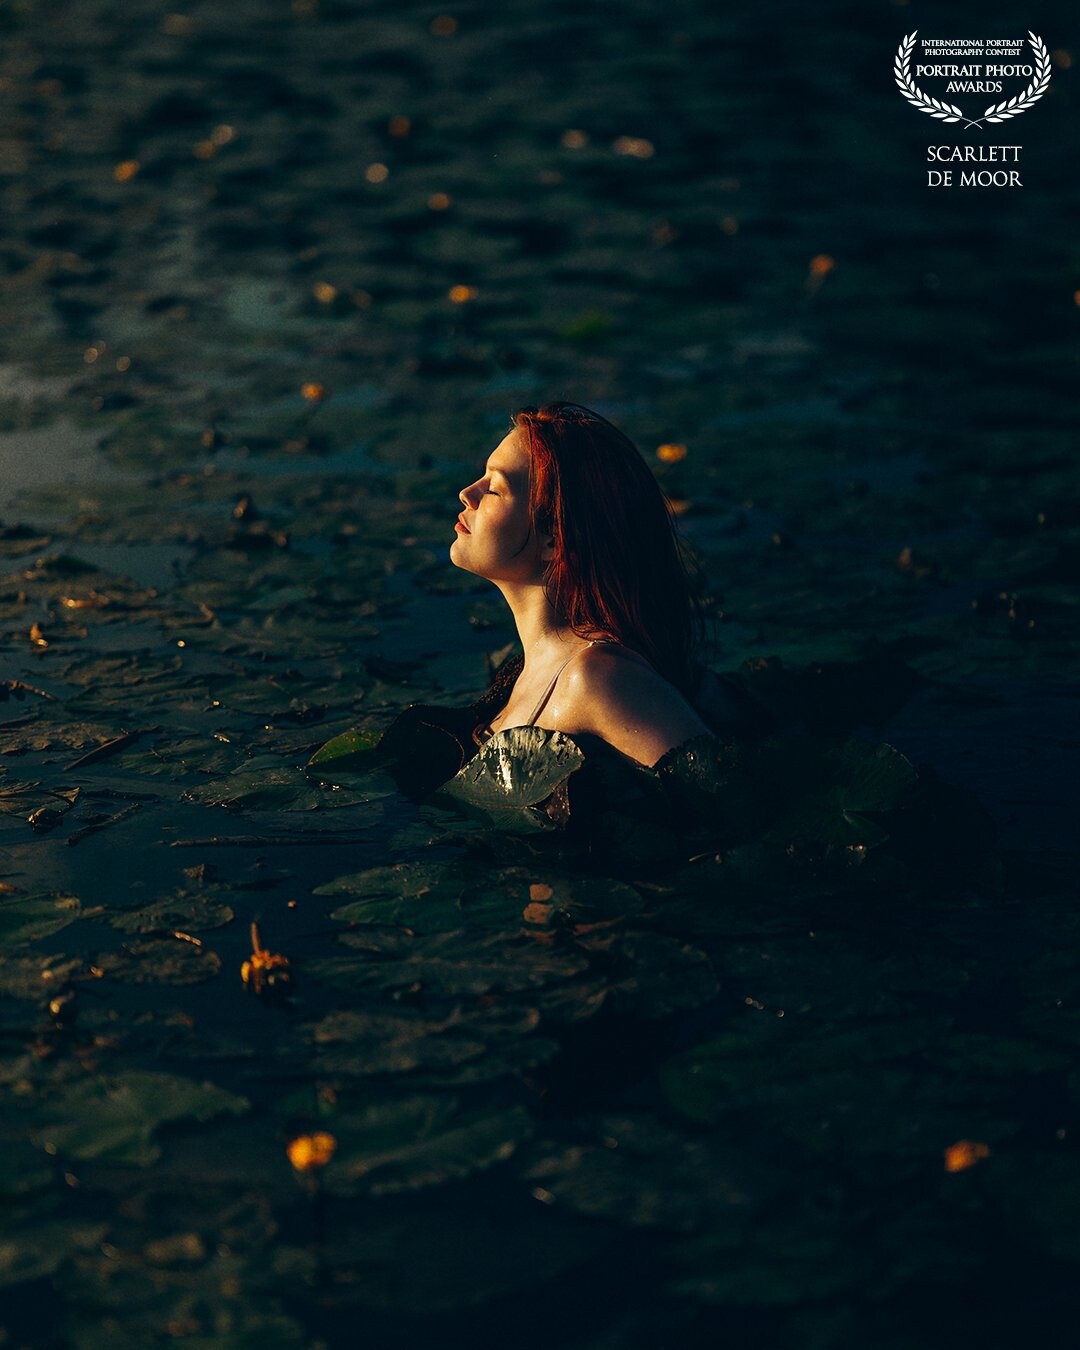 This was an awesome shoot! But what you don’t see in this photo, is that Judiths legs were strangled in slippery water lily stems, her feet got sucked into the mud and underneath the surface her body was covered with tiny beetles. But hey, anything for an awesome photo, right?